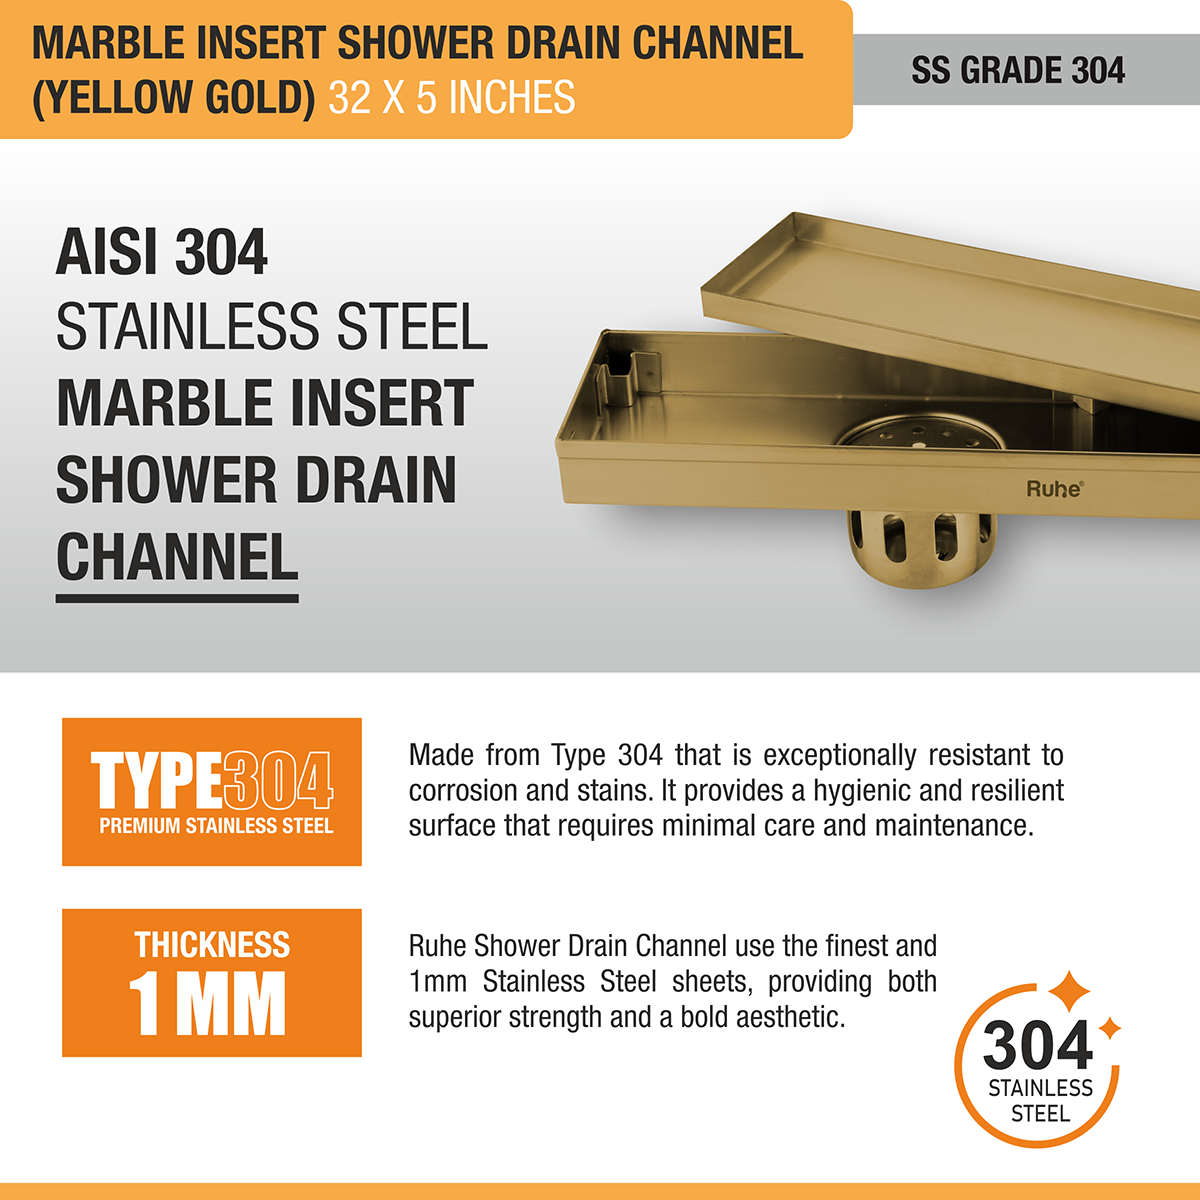 Marble Insert Shower Drain Channel (32 x 5 Inches) YELLOW GOLD PVD Coated stainless steel